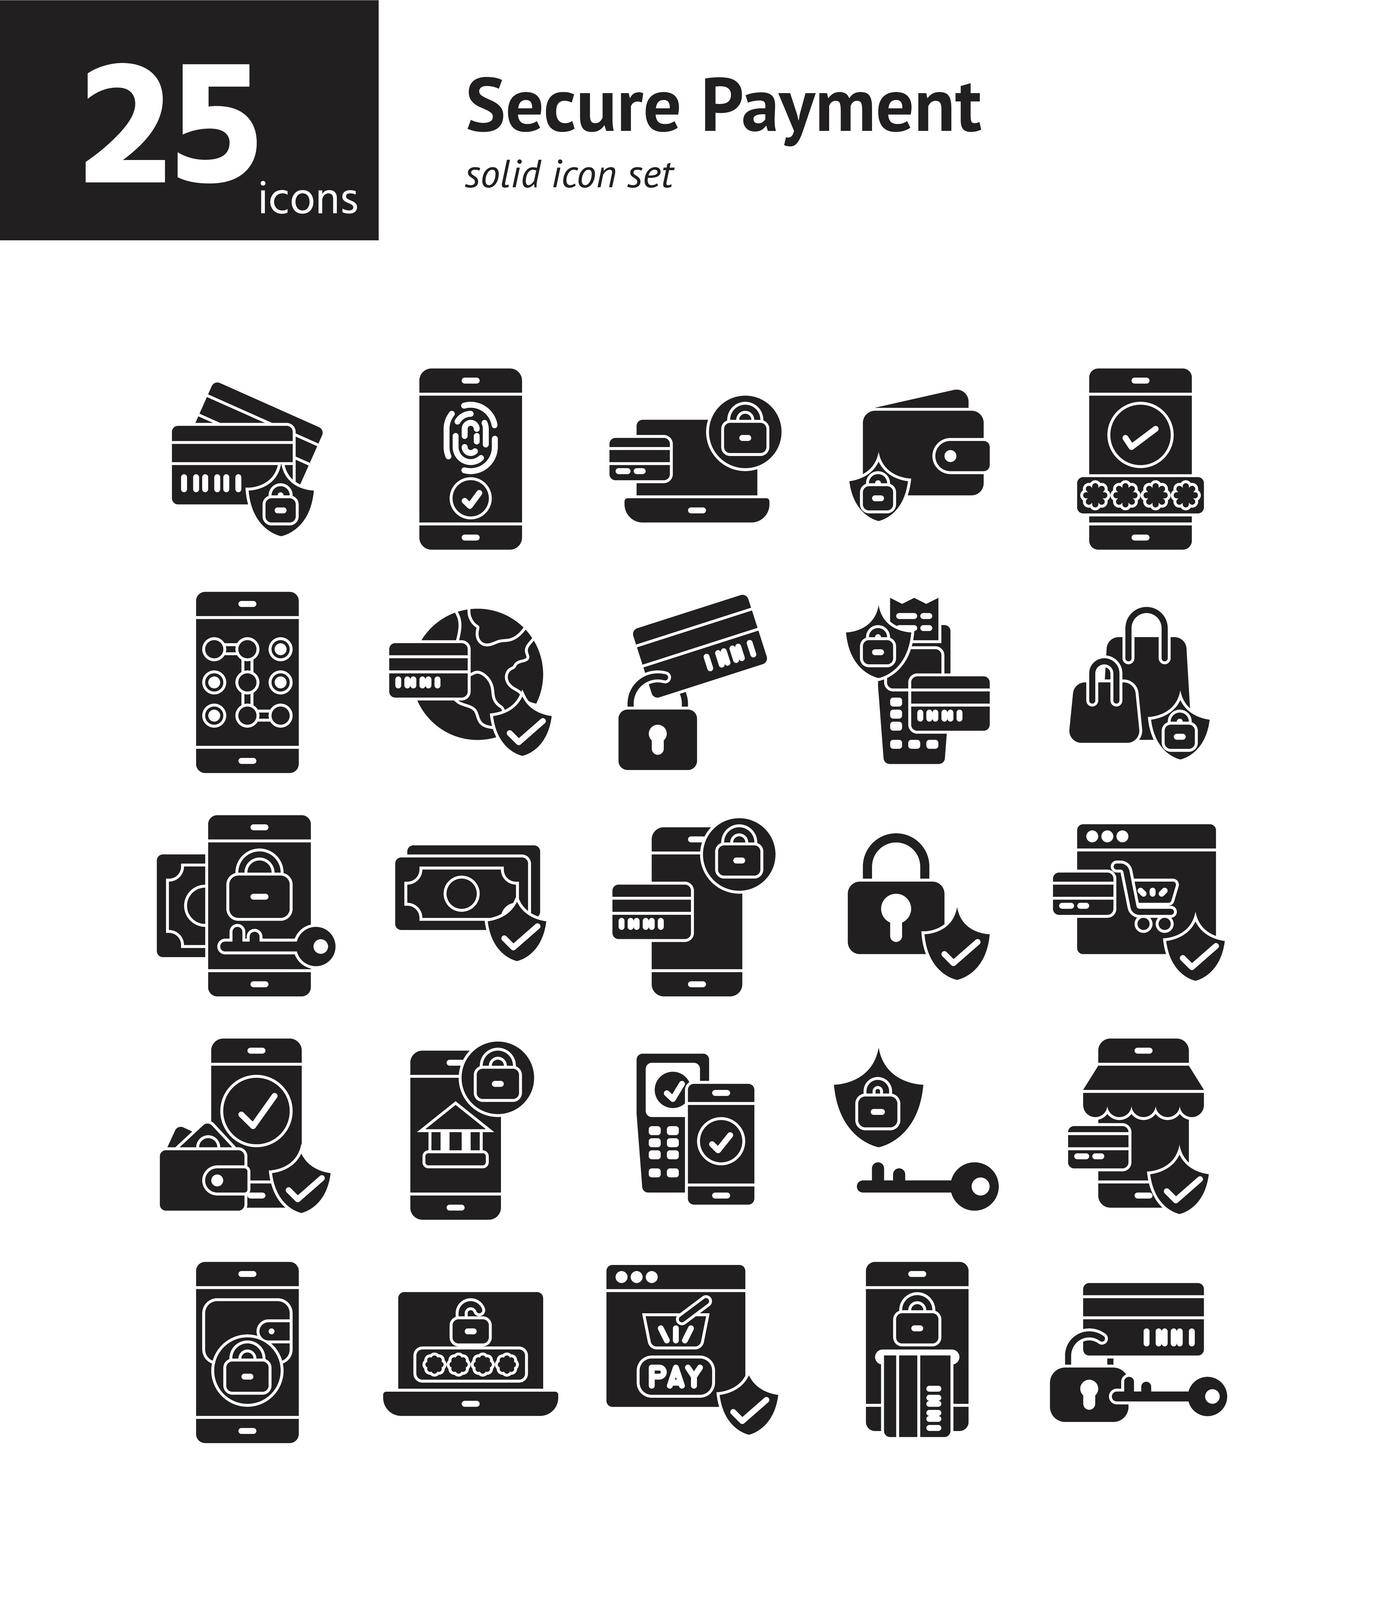 Secure Payment solid icon set. Vector and Illustration.